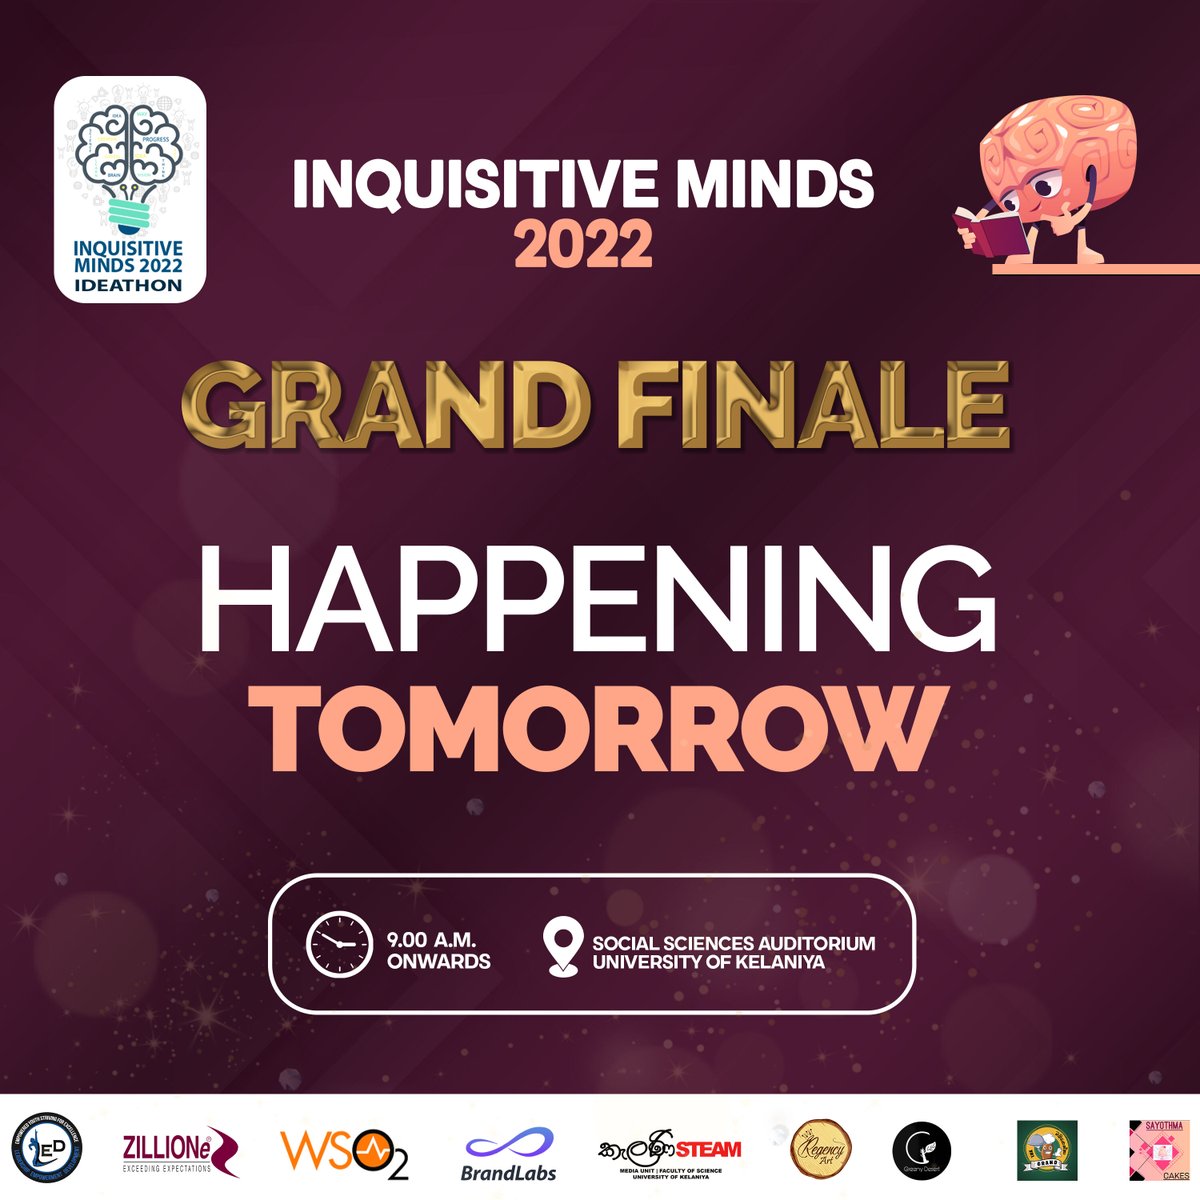 There’s a taste of honey in the process of waiting for all hard work to yield fruitful results. 

20+ Universities
10 Top Teams
8 Weeks of Hard Work 

The final moment is not far away.

Lock the date for the GRAND FINALE of Inquisitive Minds 2022 - Ideathon.

#InquisitiveMinds_LE